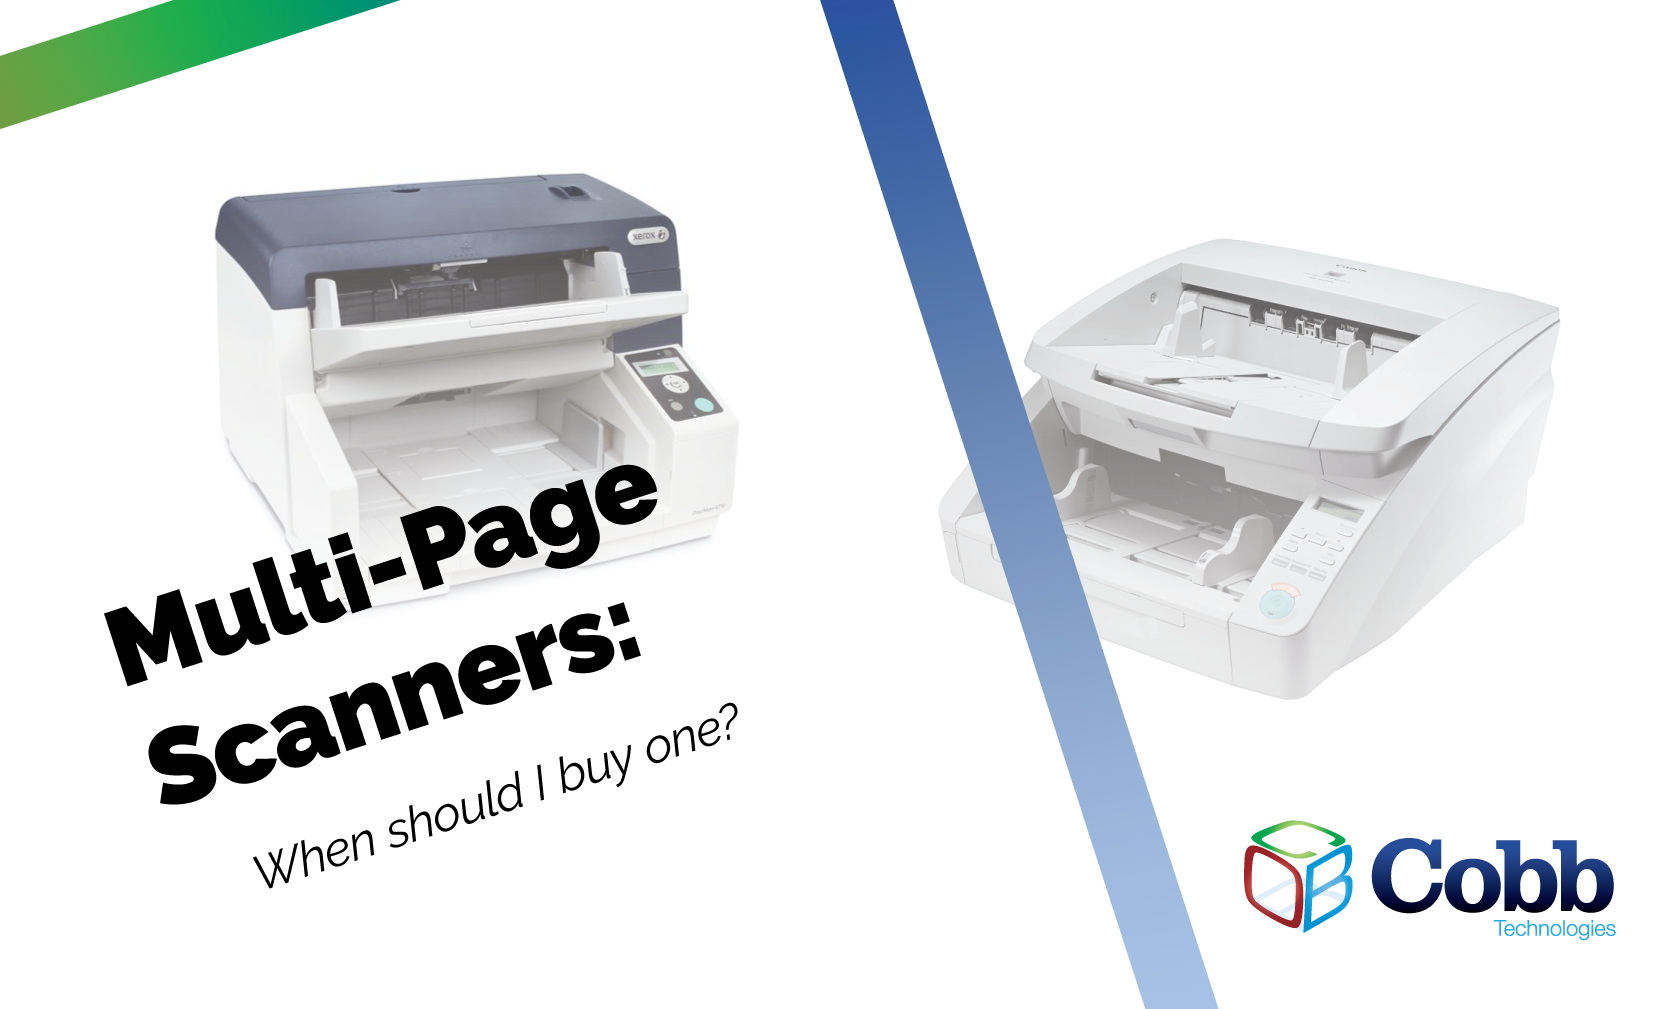 When is it Time to Buy a Multi-Page Scanner?